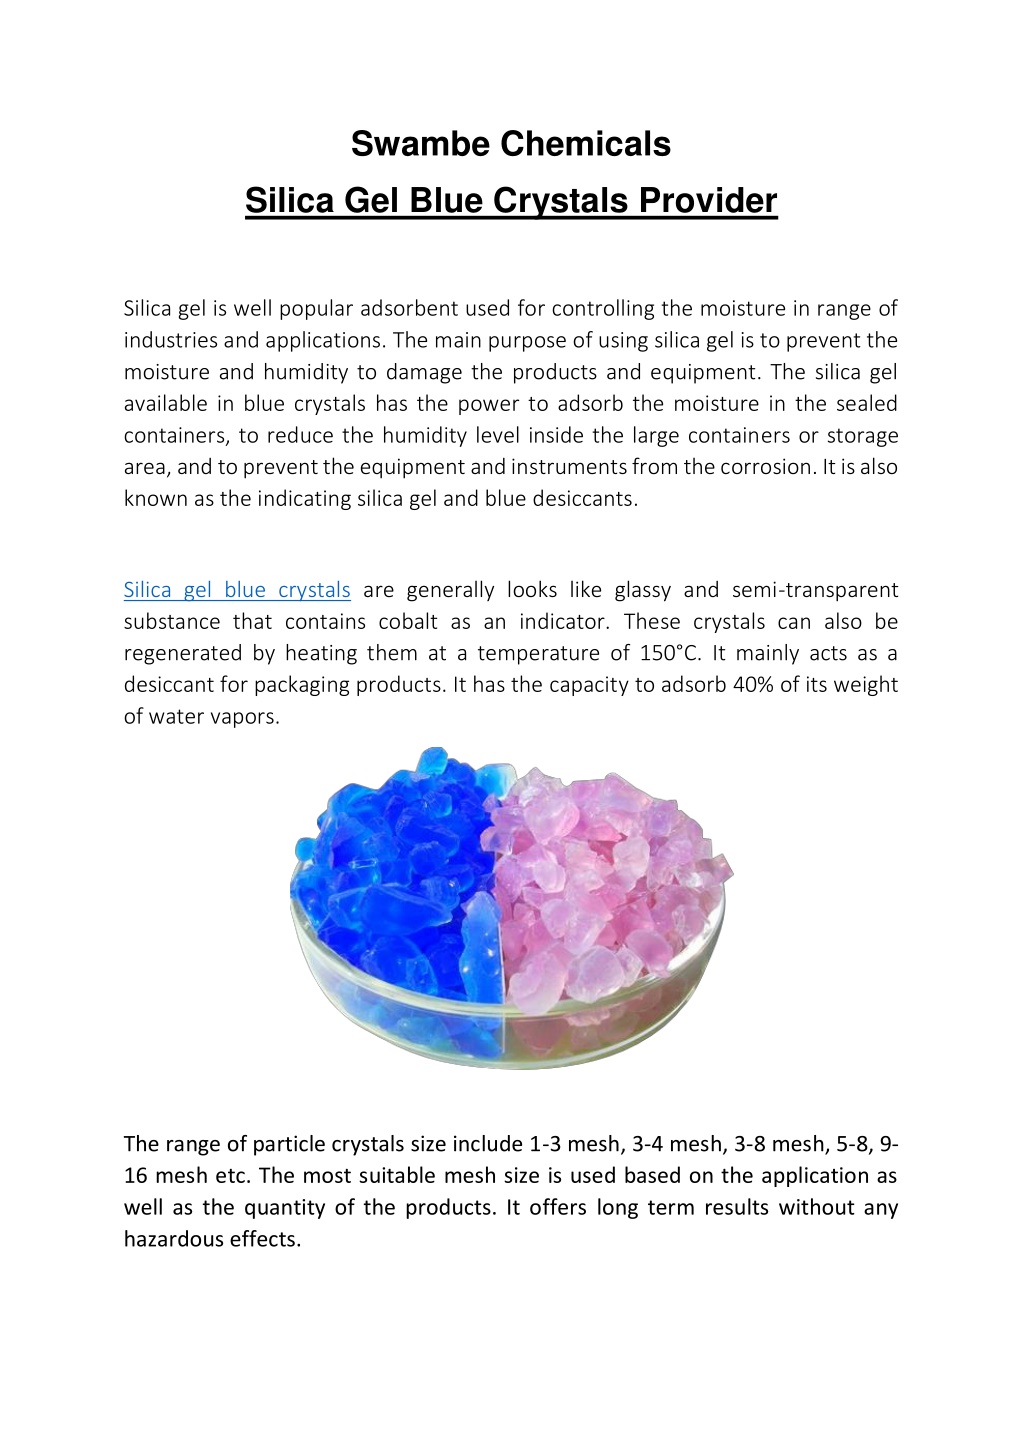 PPT - Swambe Chemicals - Silica Gel Blue Crystals Provider PowerPoint  Presentation - ID:12271473